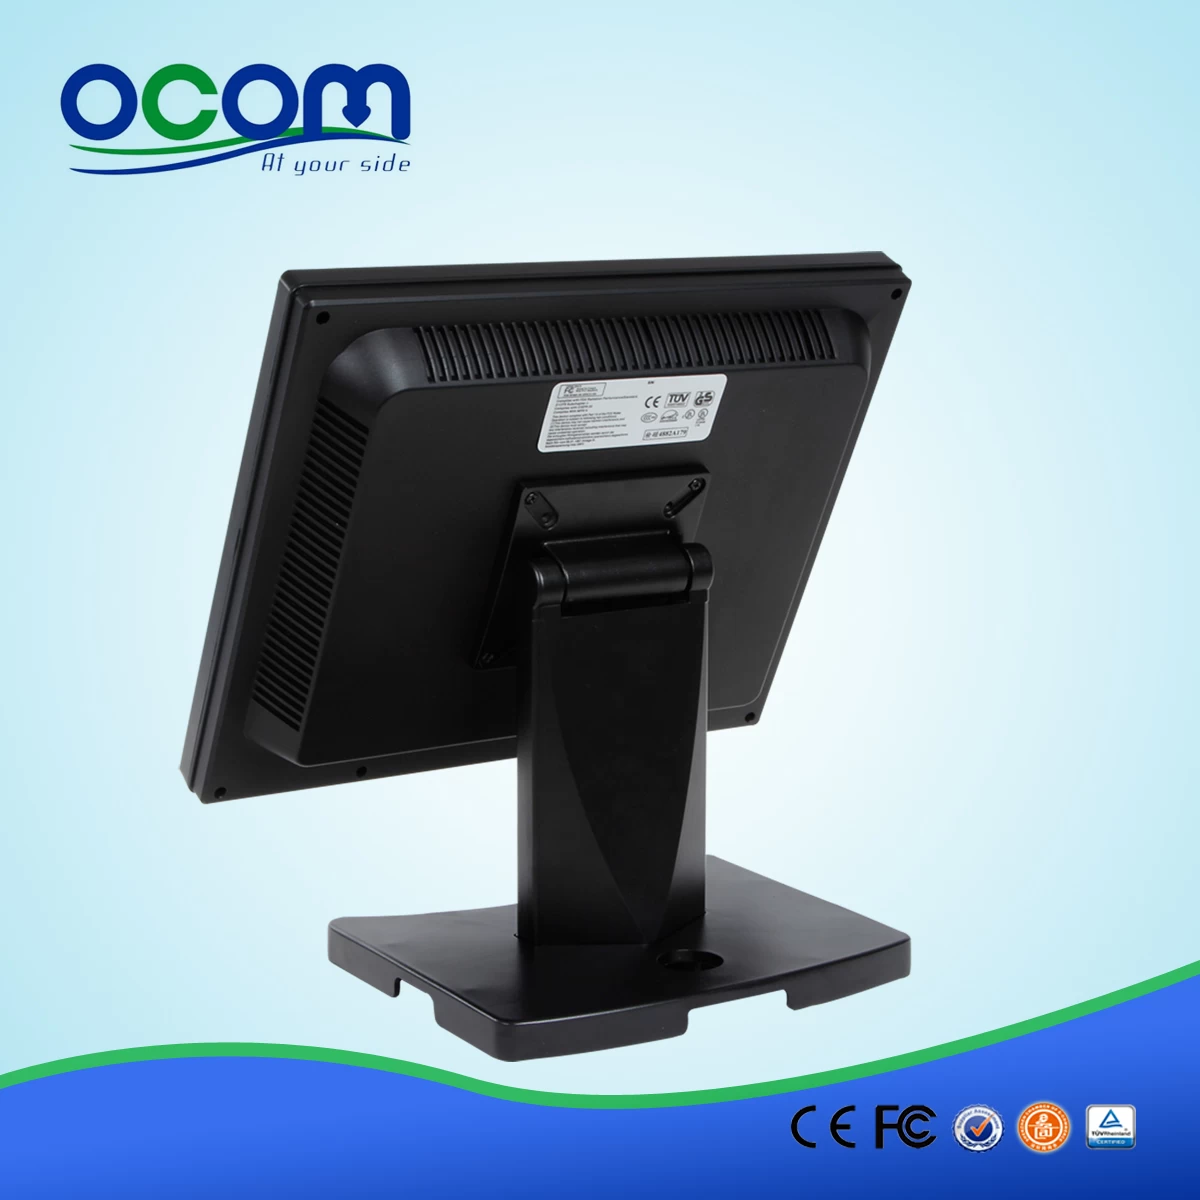 (POS8815A) 15 Inches All-In-One Touch Screen POS Terminal